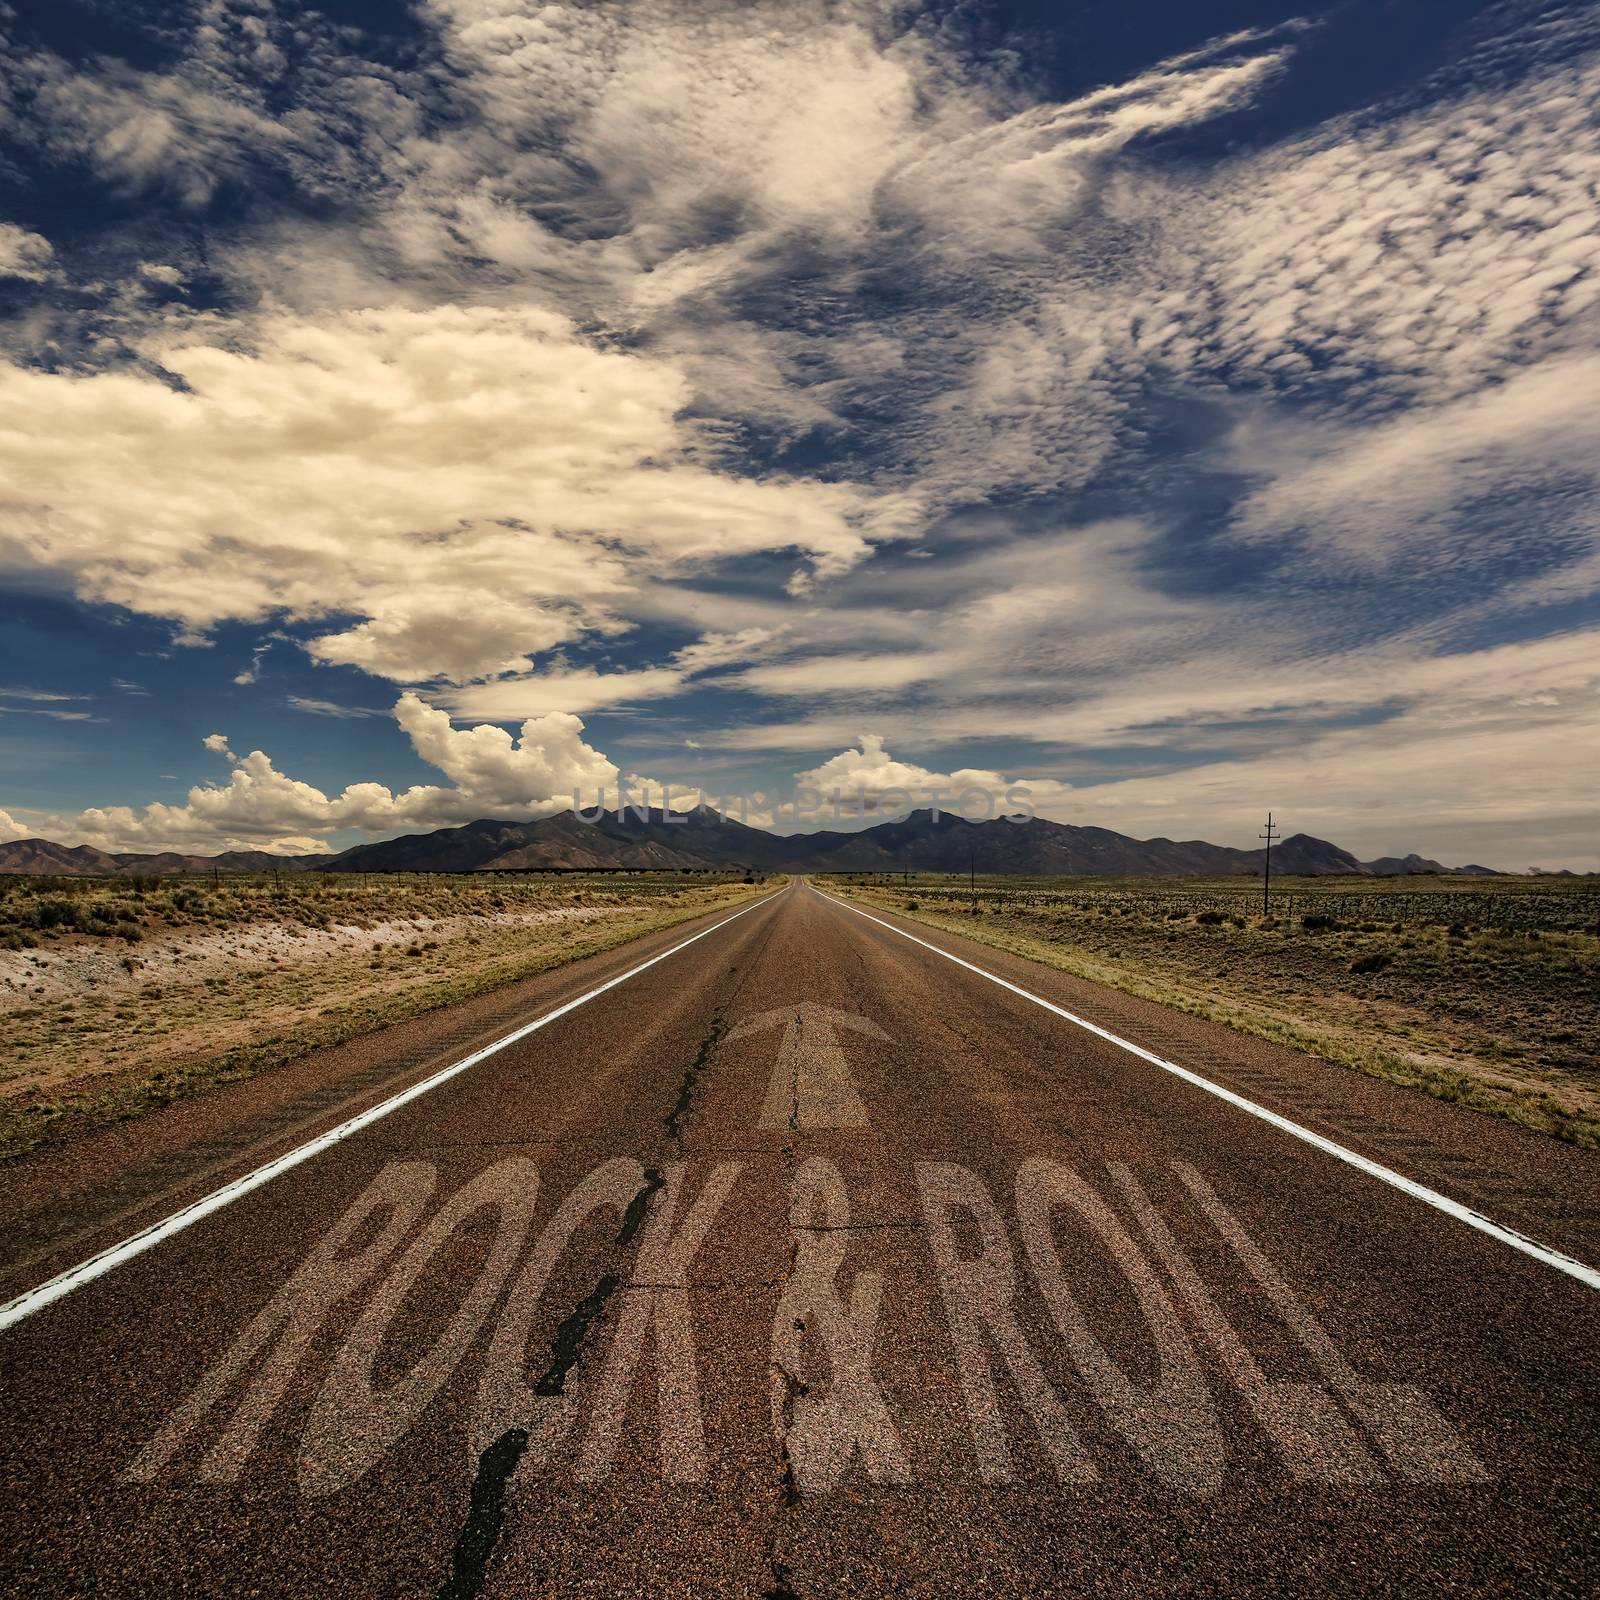 Conceptual image of desert road with the word rock & roll and arrow